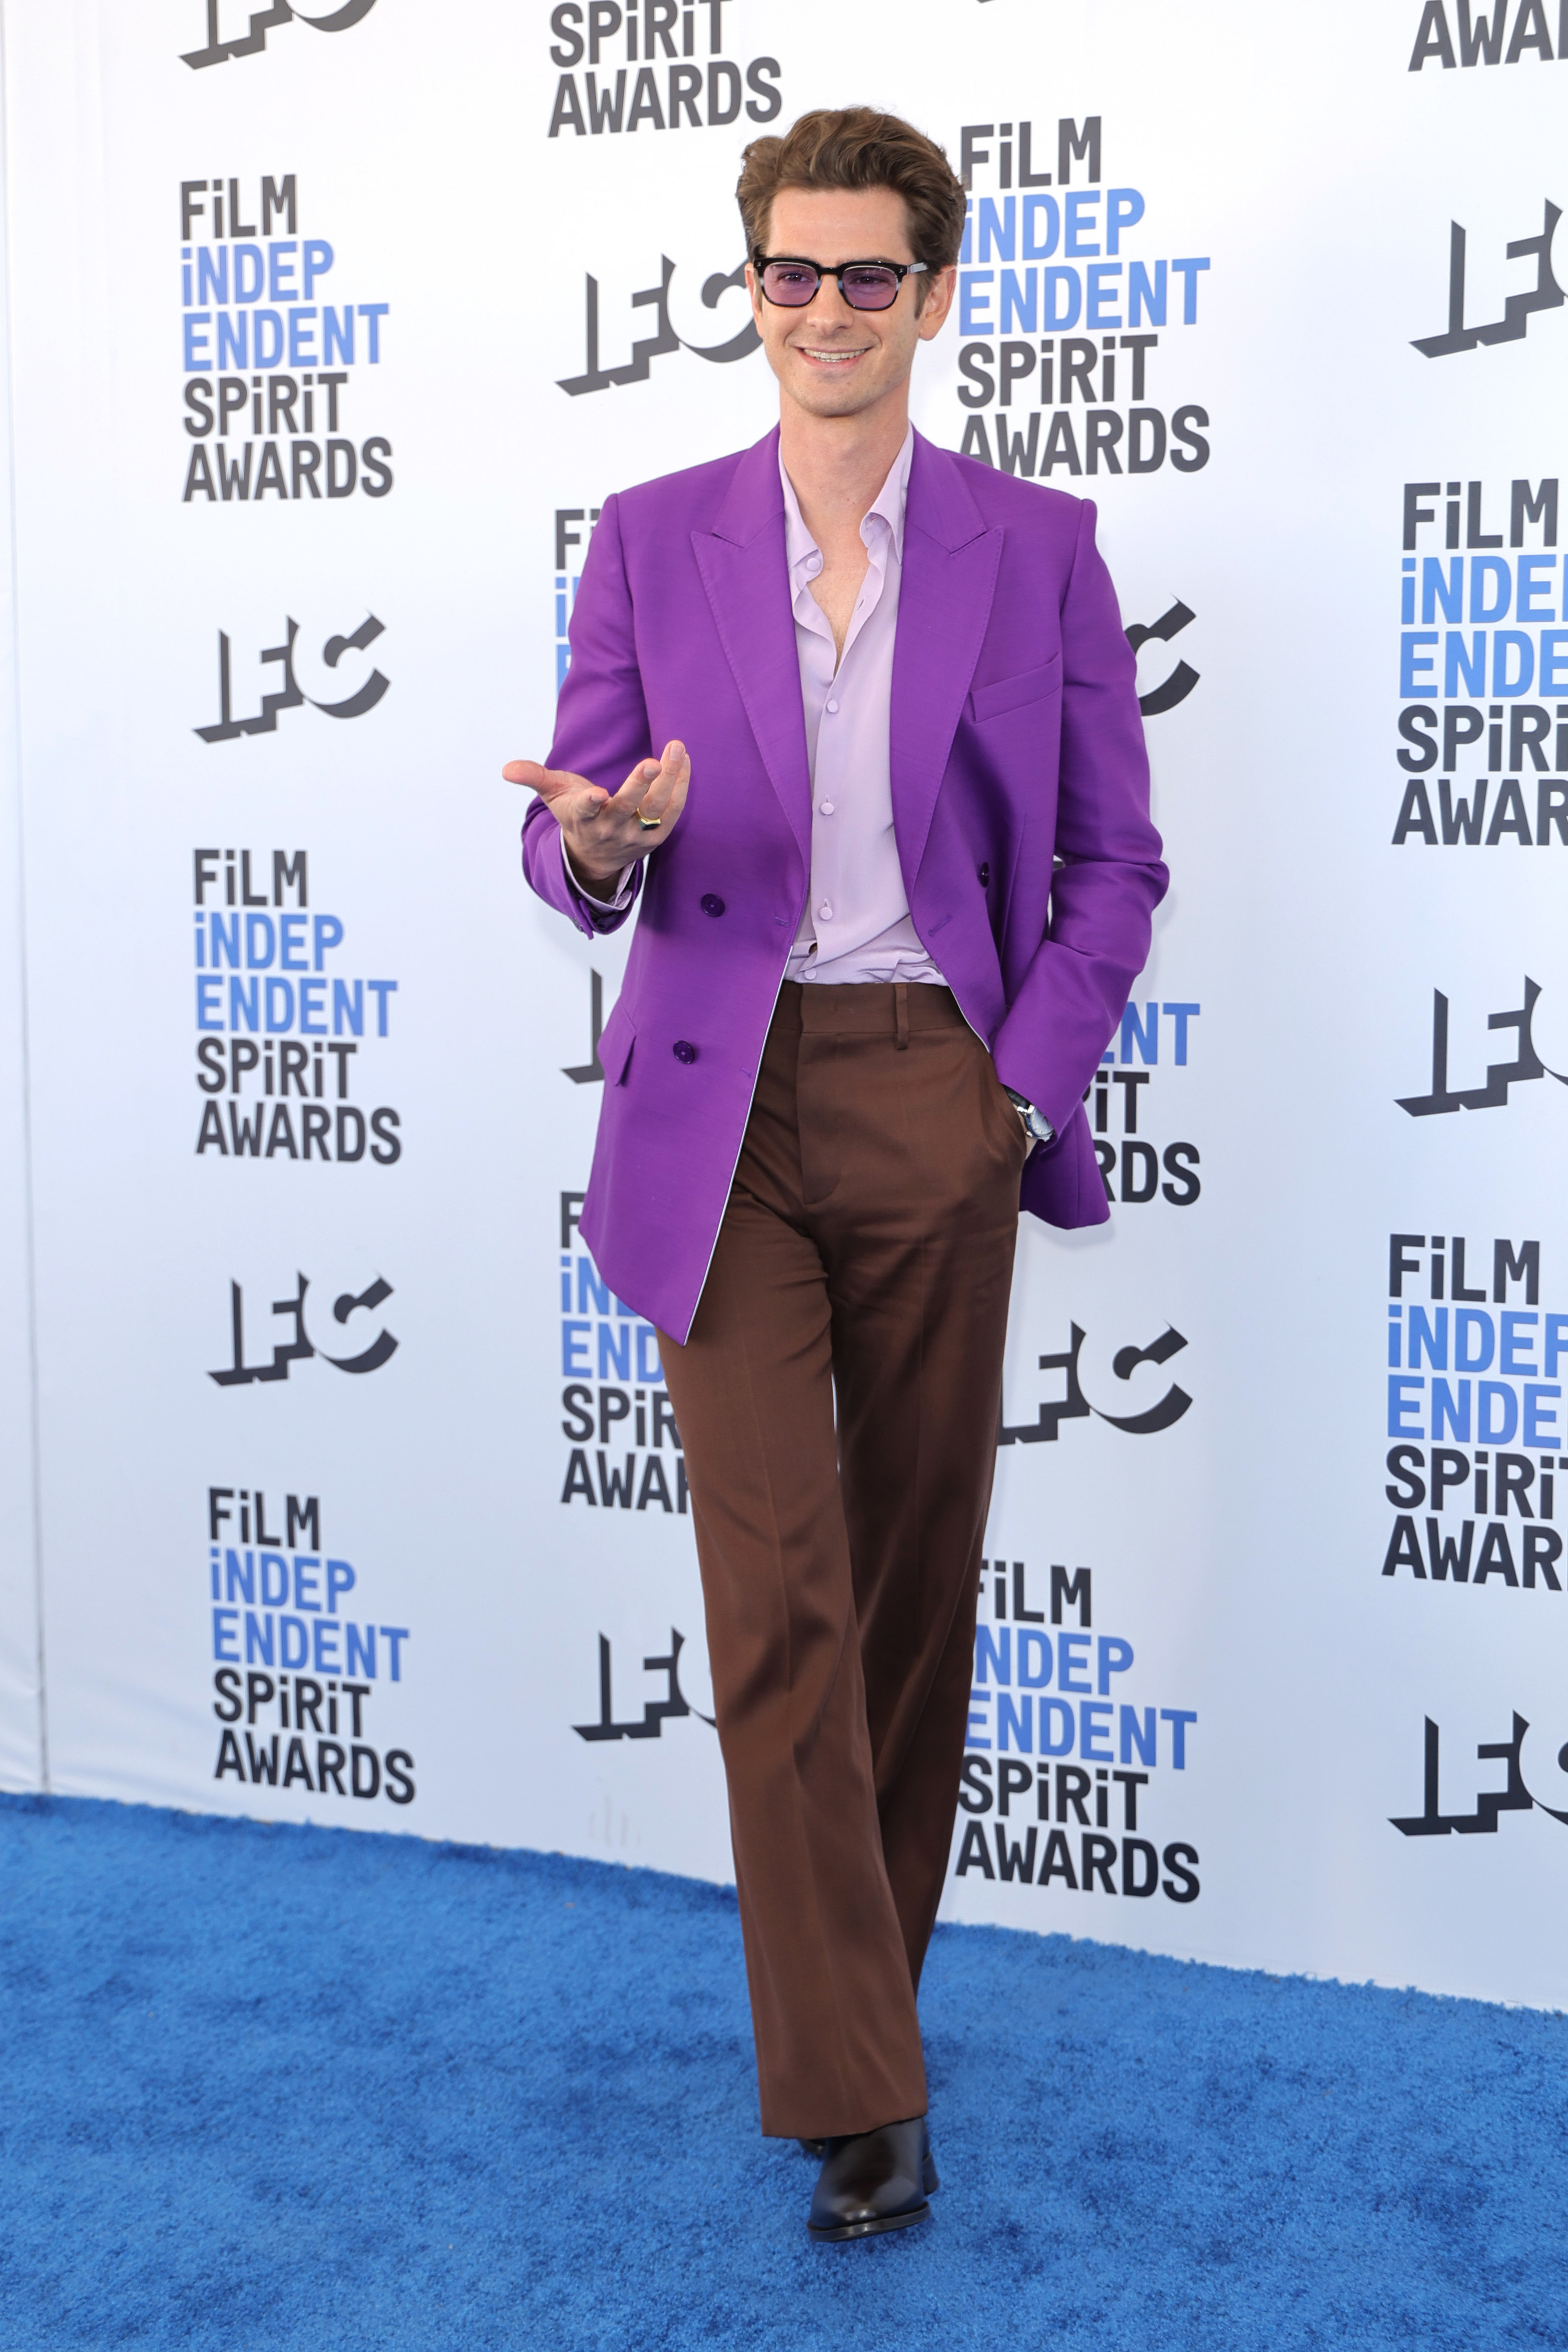 Andrew wears a purple blazer and brown flare pants